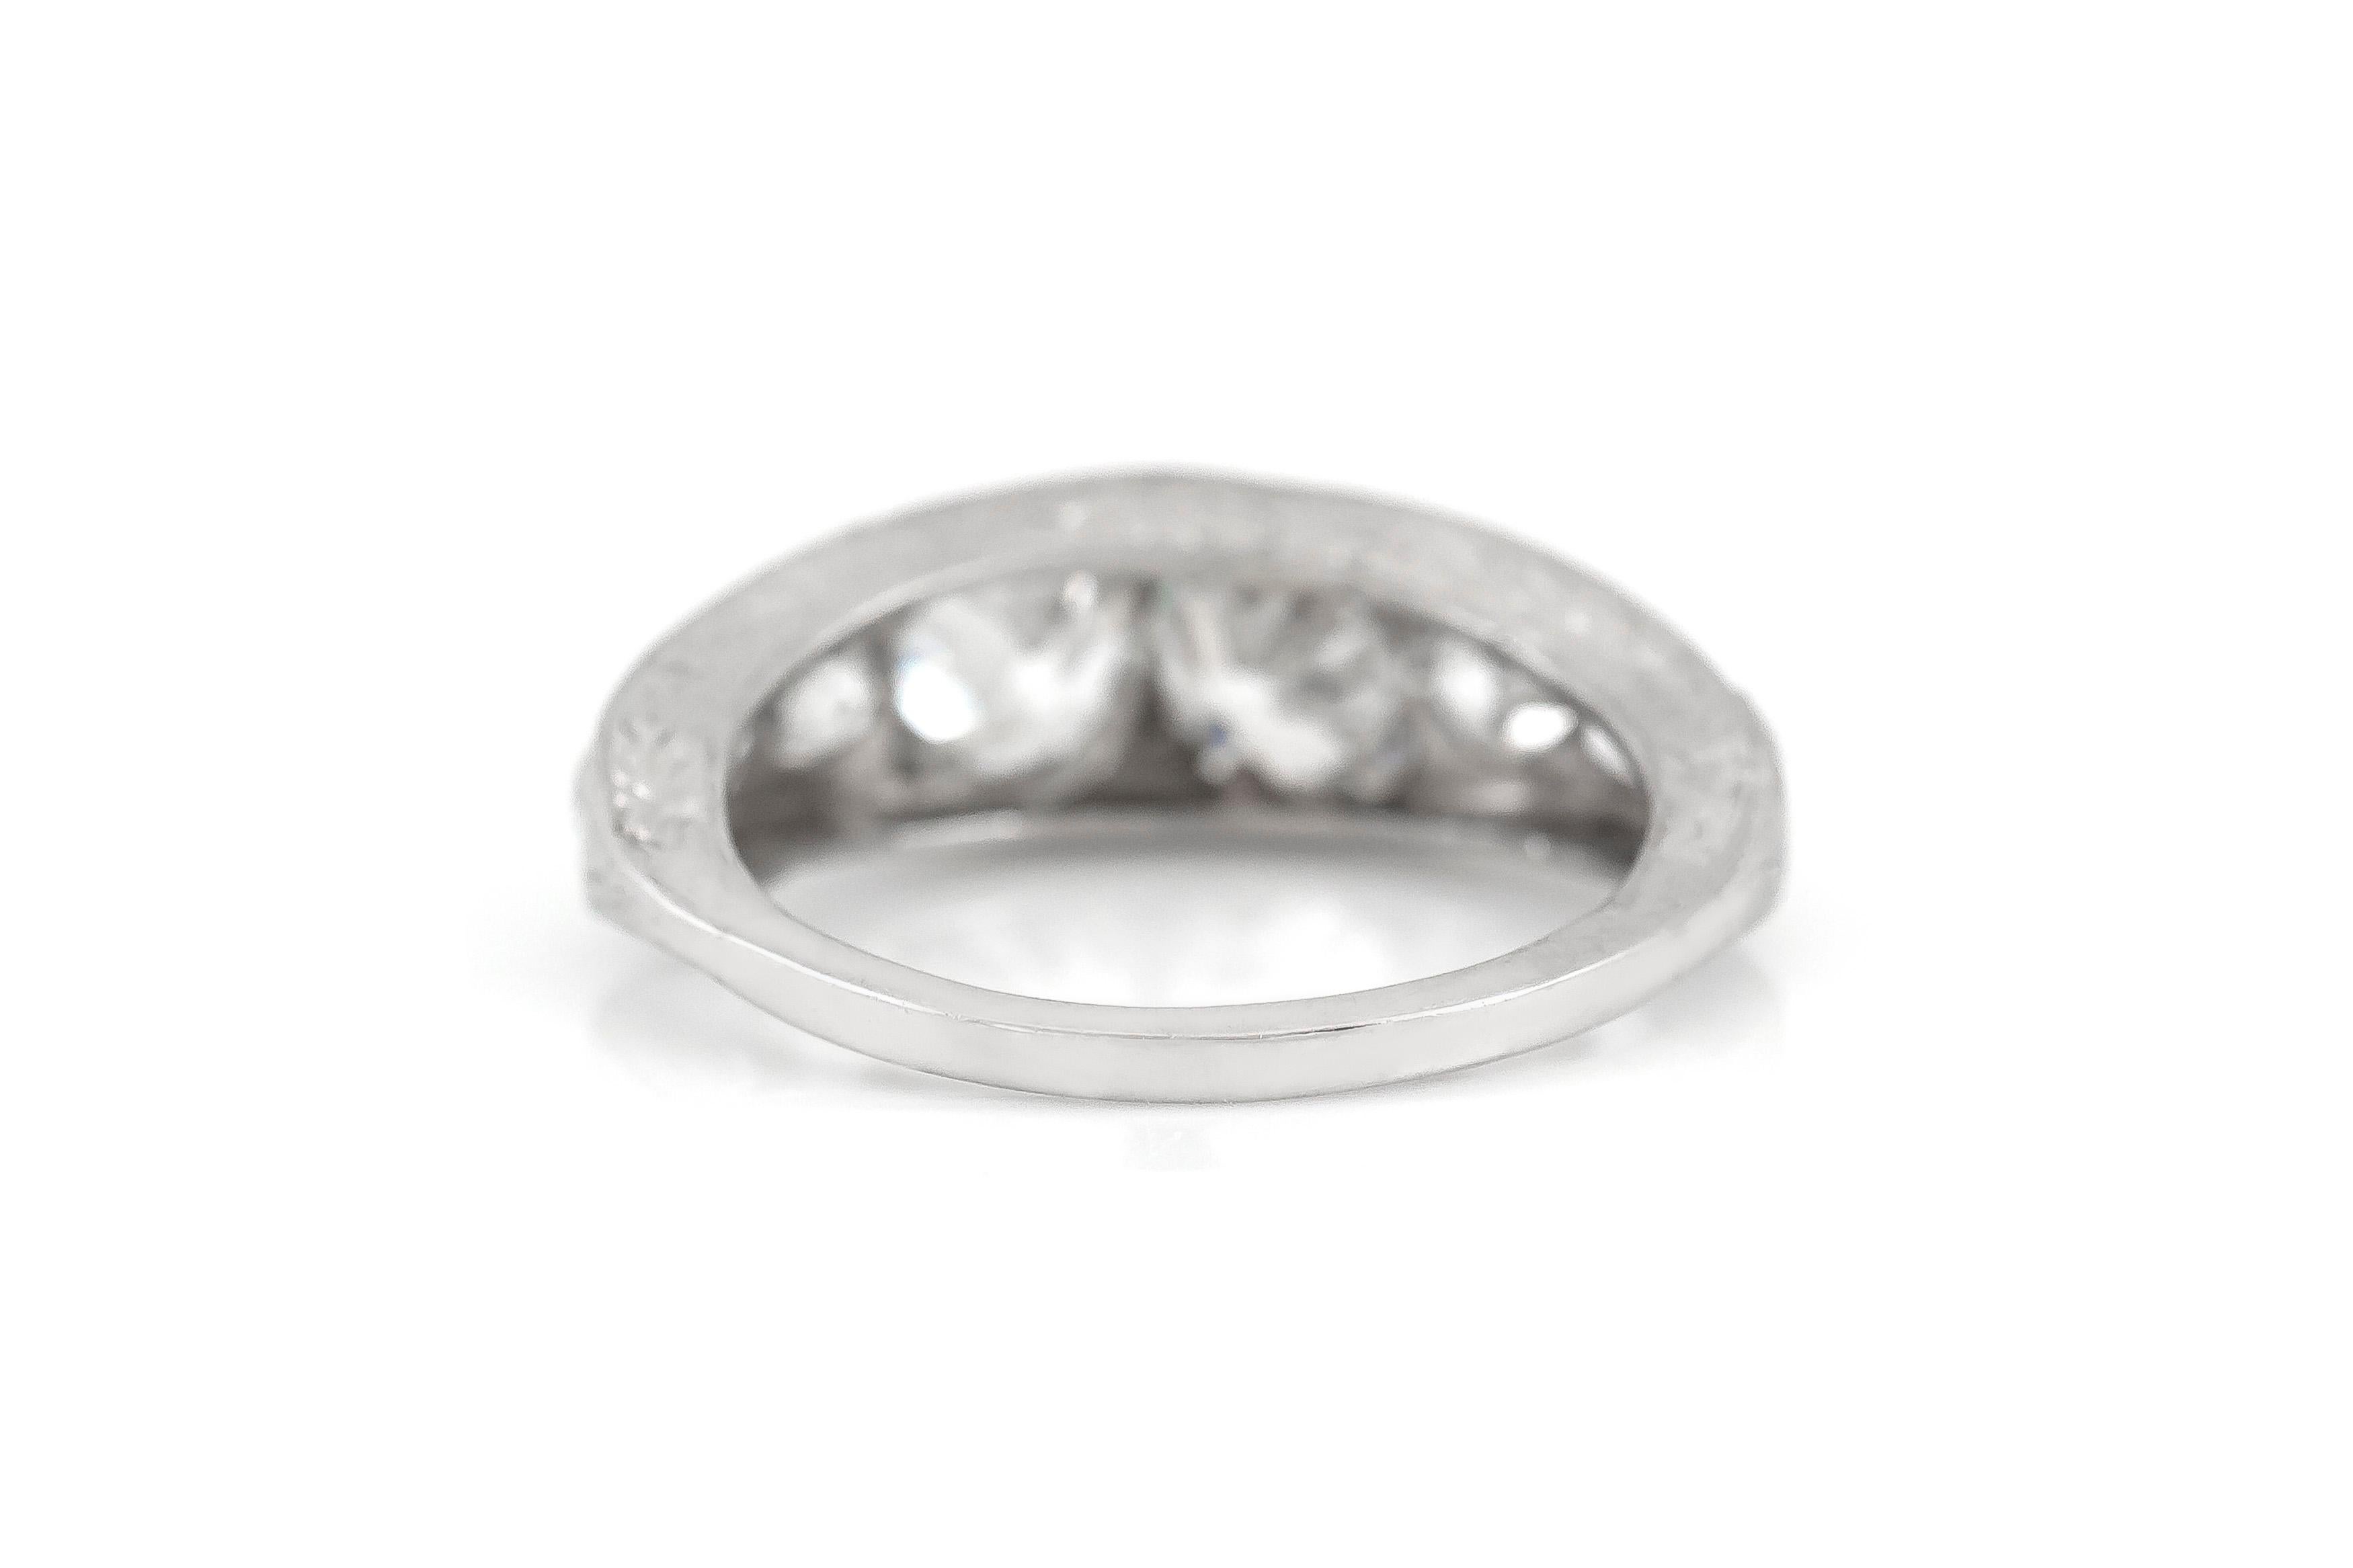 The ring is finely crafted in platinum with diamonds weighing approximately total of 1.90 carat.